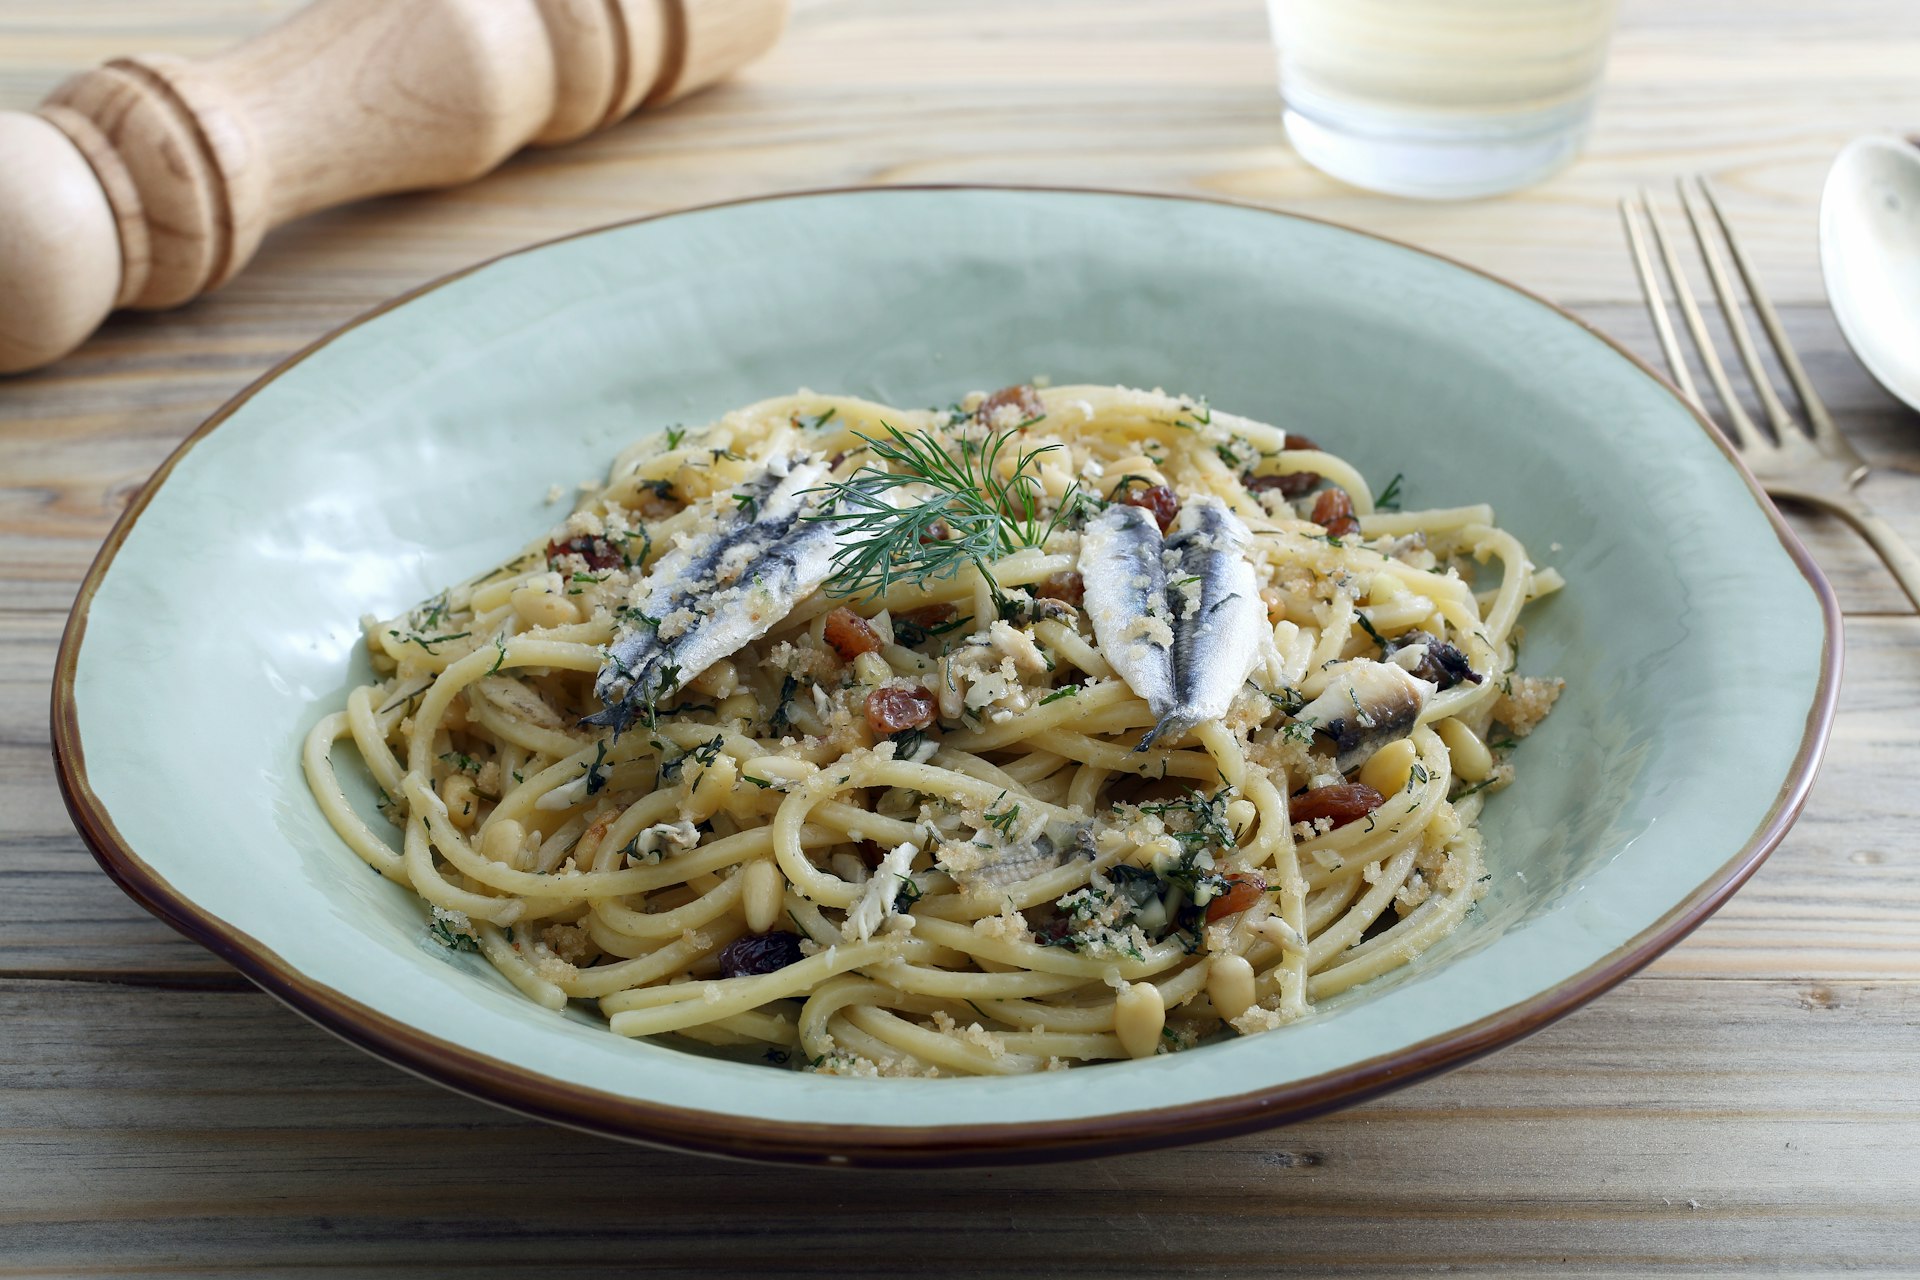 Italian pasta with sardines, served in a blue bowl